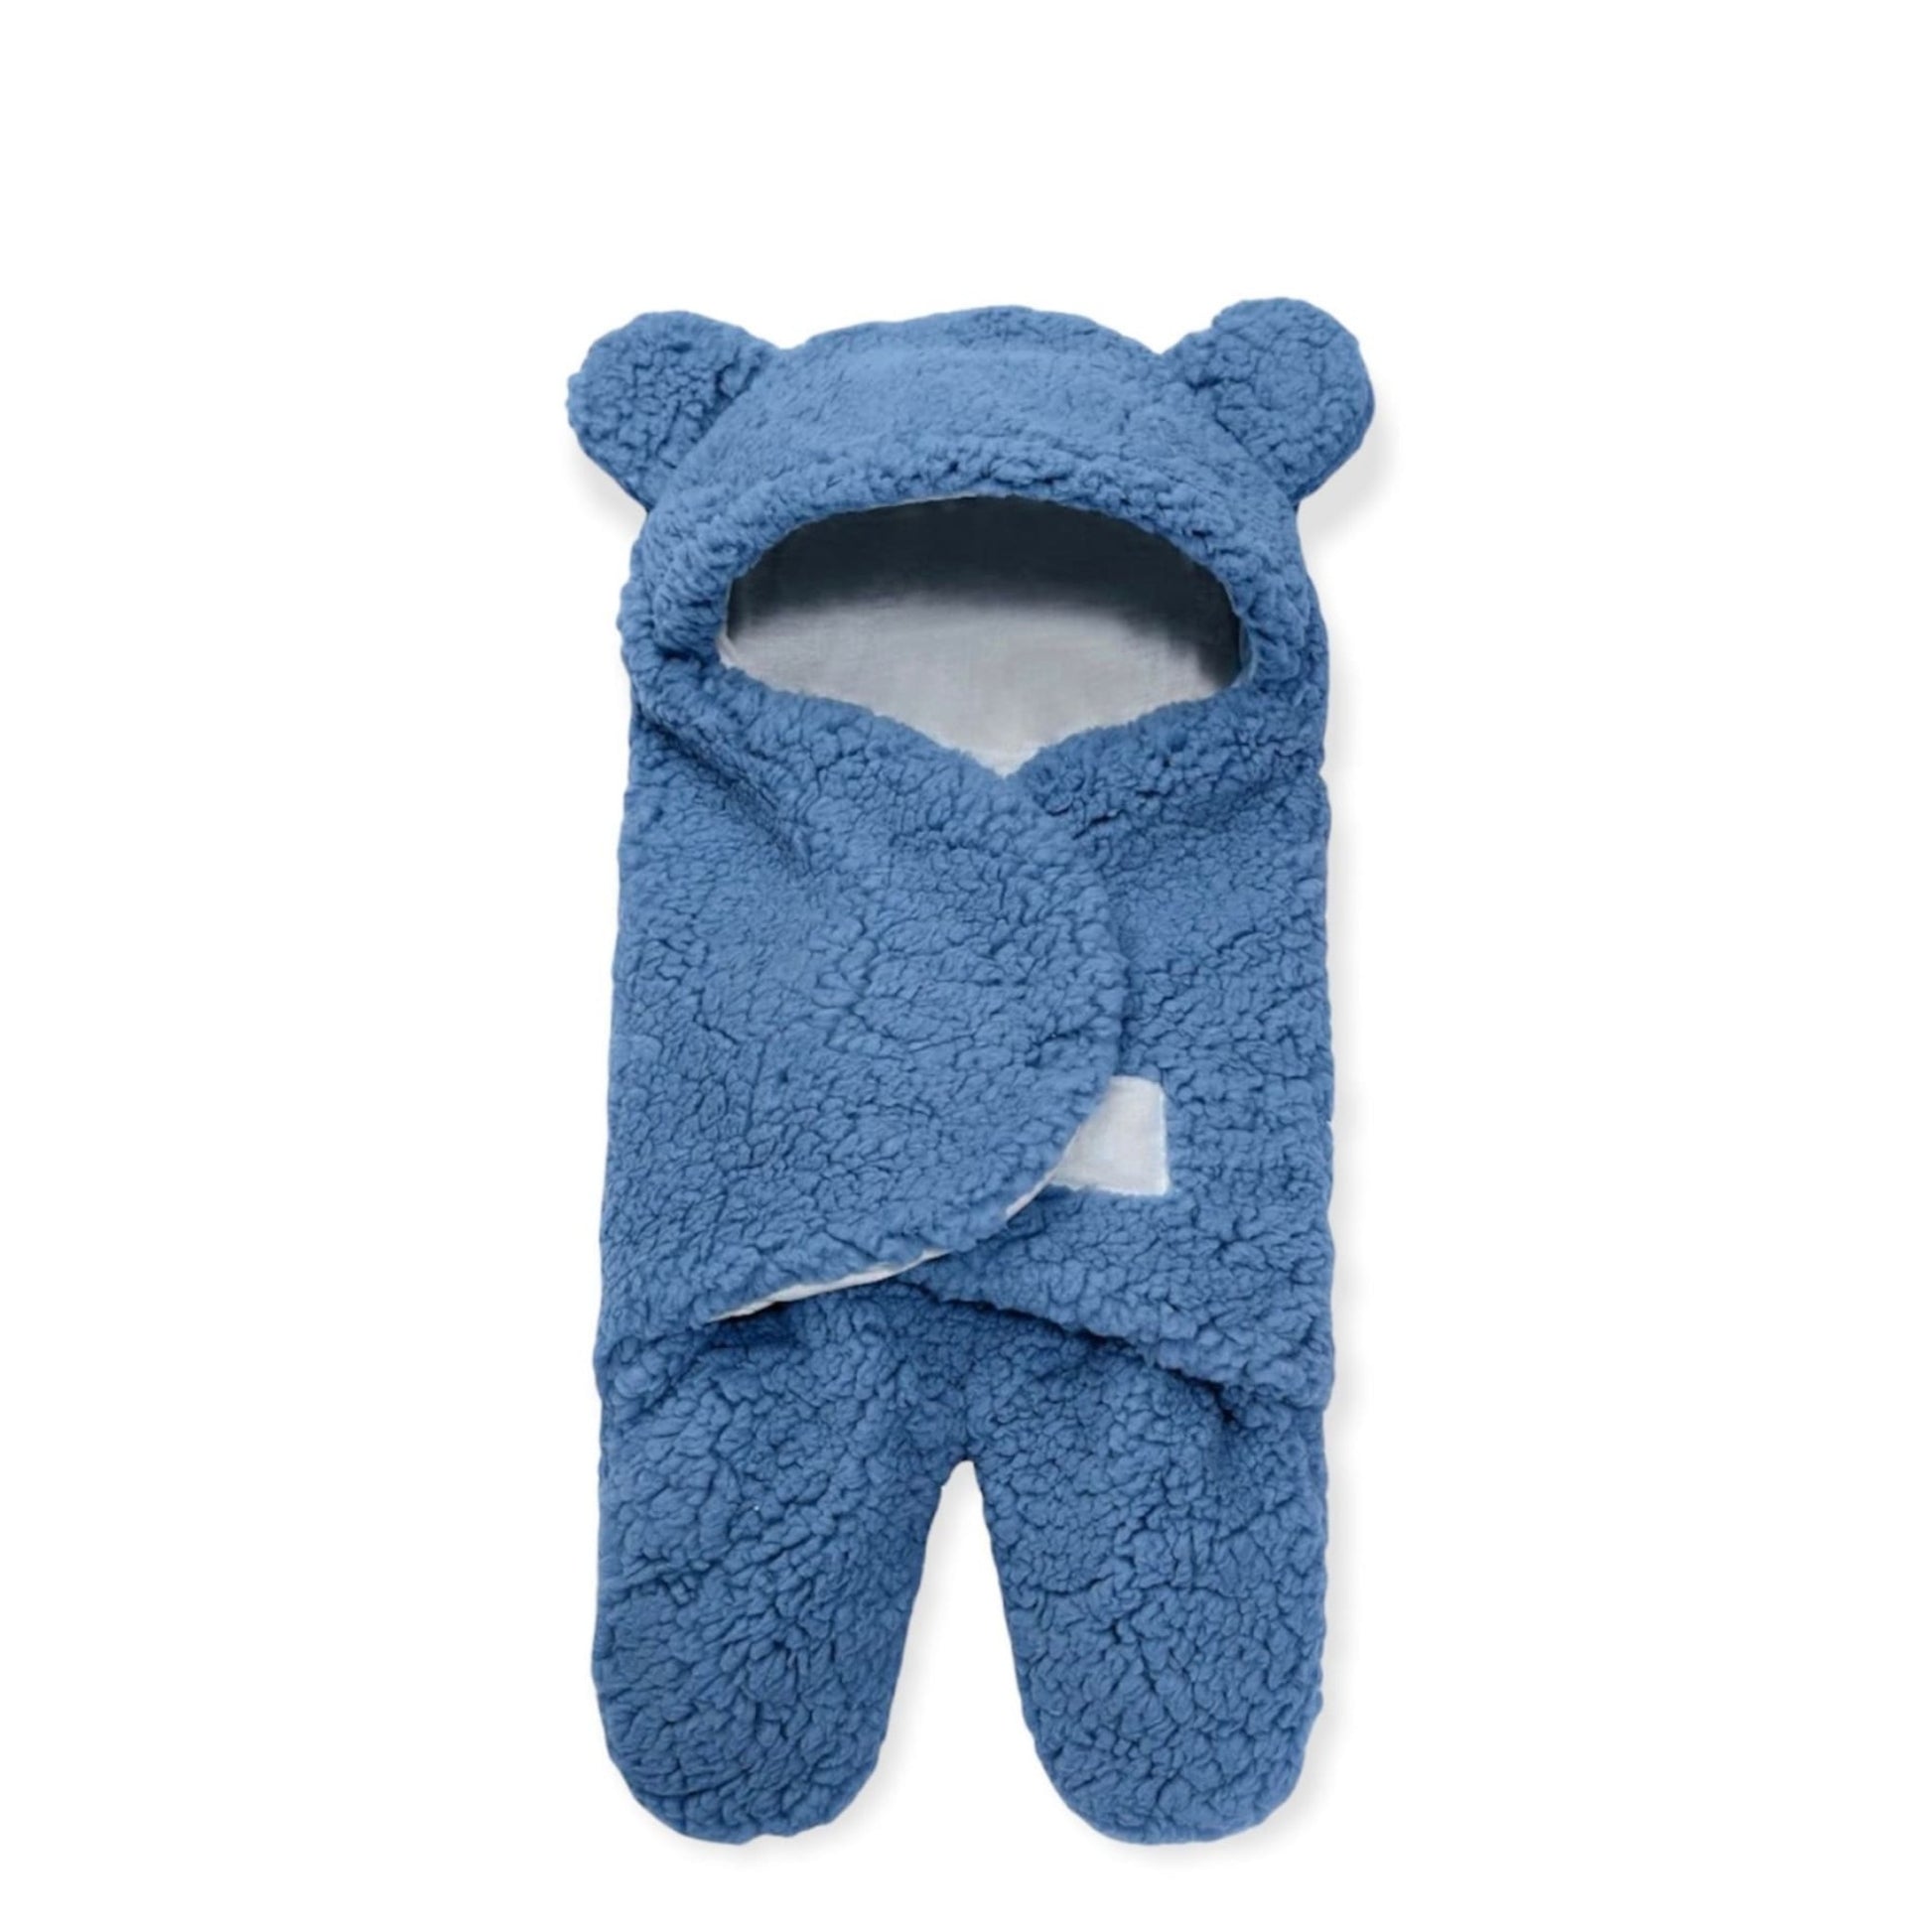 Blue baby sleeping bag and swaddle for winter - hunny bubba kids